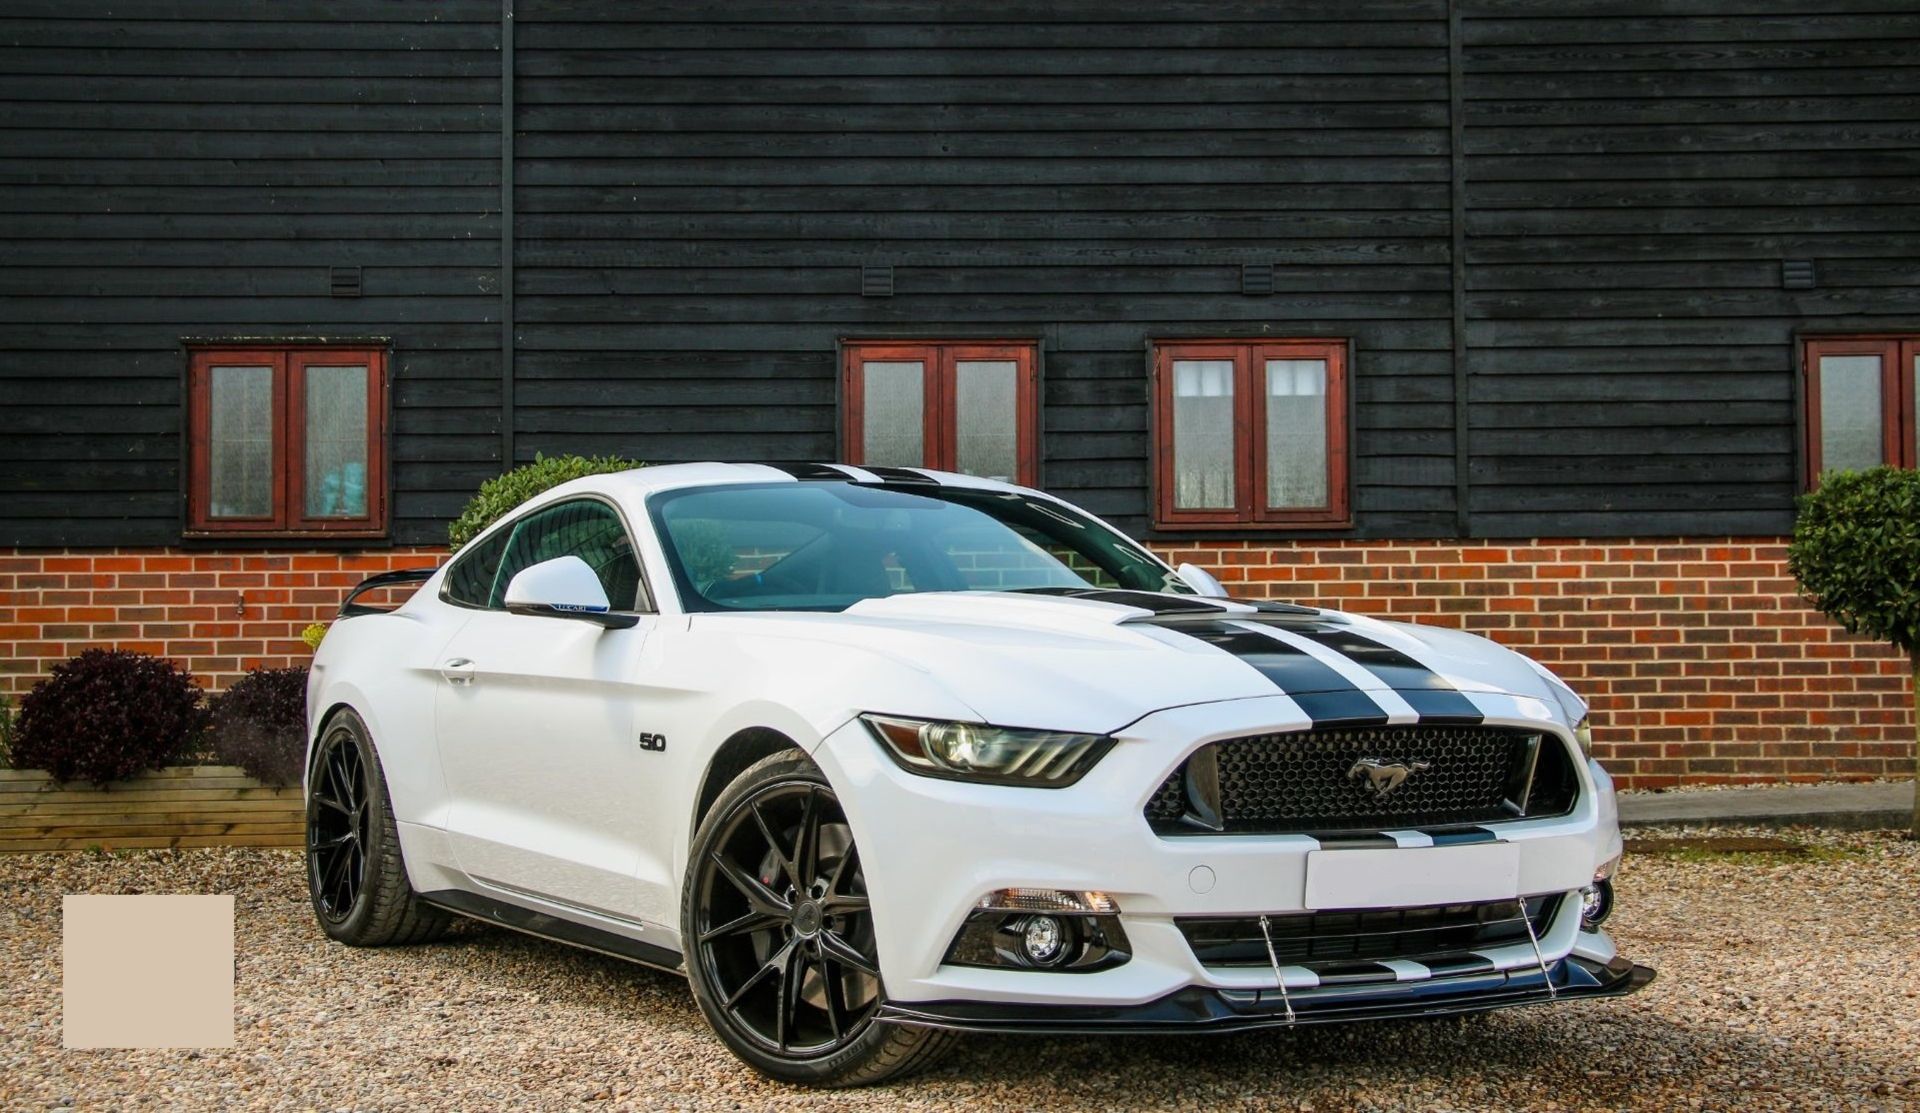 2017 RHD FORD MUSTANG 5.0 V8 GT LUCARI STAGE 3 2 DOOR COUPE, MANUAL, SHOWING 1900 MILES *PLUS VAT* - Image 2 of 10